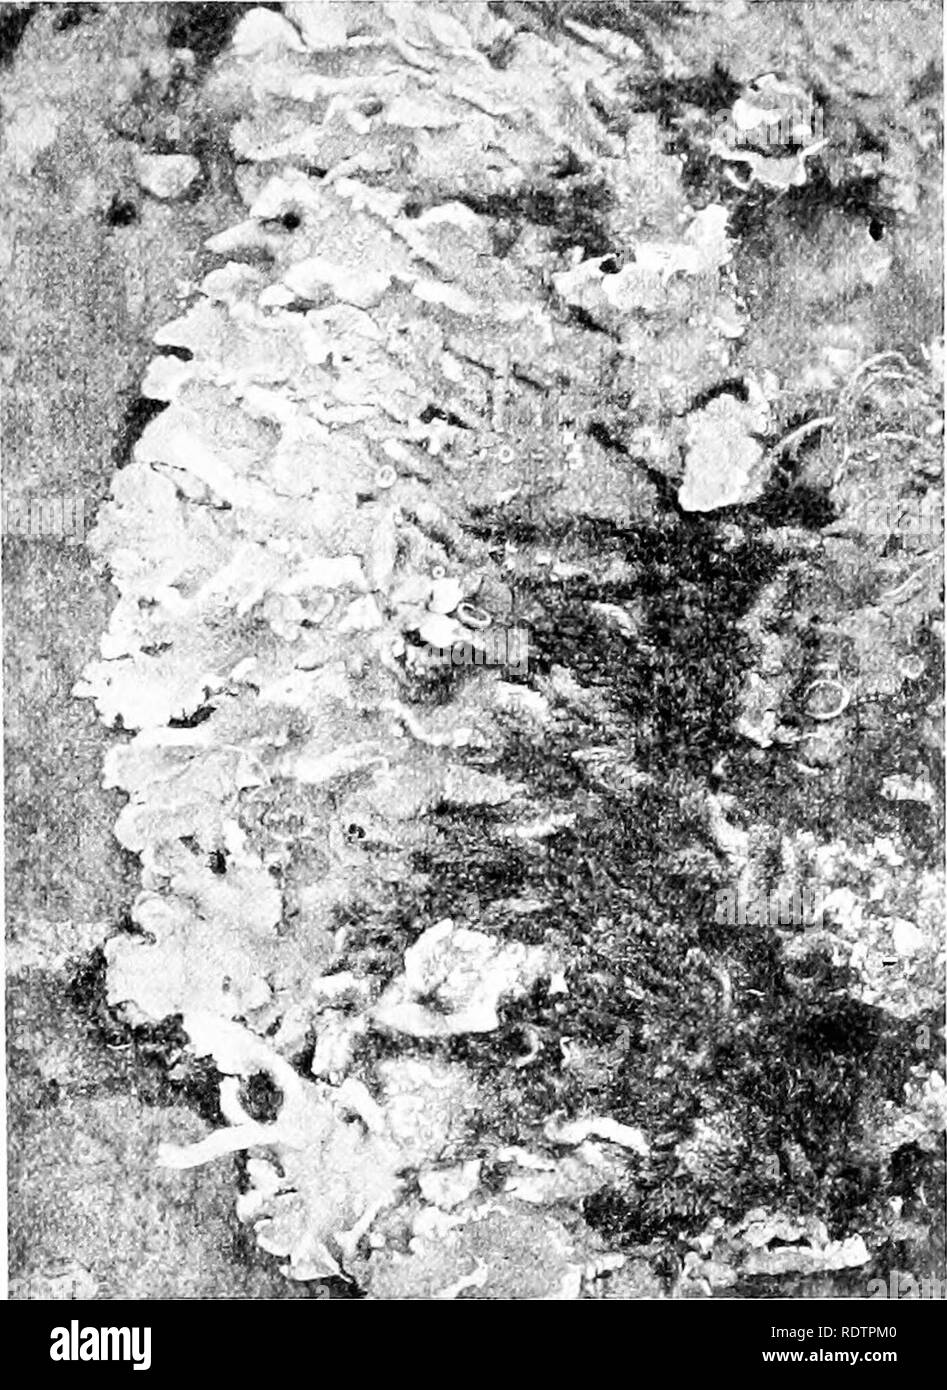 . Lichens. Lichens. STRATOSE THALLUS 89 into short cells and a kind of plectenchyma is formed, as in Lecanora {Psoroma) hypnorum, in Endocarpan, etc.. Fig. 49. Parmelia caperata Ach. (S. H., Photo.). The felted medulla is characteristic of most lichens and is formed of loose slender branching septate hyphae with thickish walls. This interwoven hyphal texture provides abundant air-spaces. Hue^ has noted that the walls of the medullary hyphae in Parmeliae are smooth, unless they have been exposed to great extremes of heat or cold, when they become wrinkled or scaly. They are very thick-walled in Stock Photo